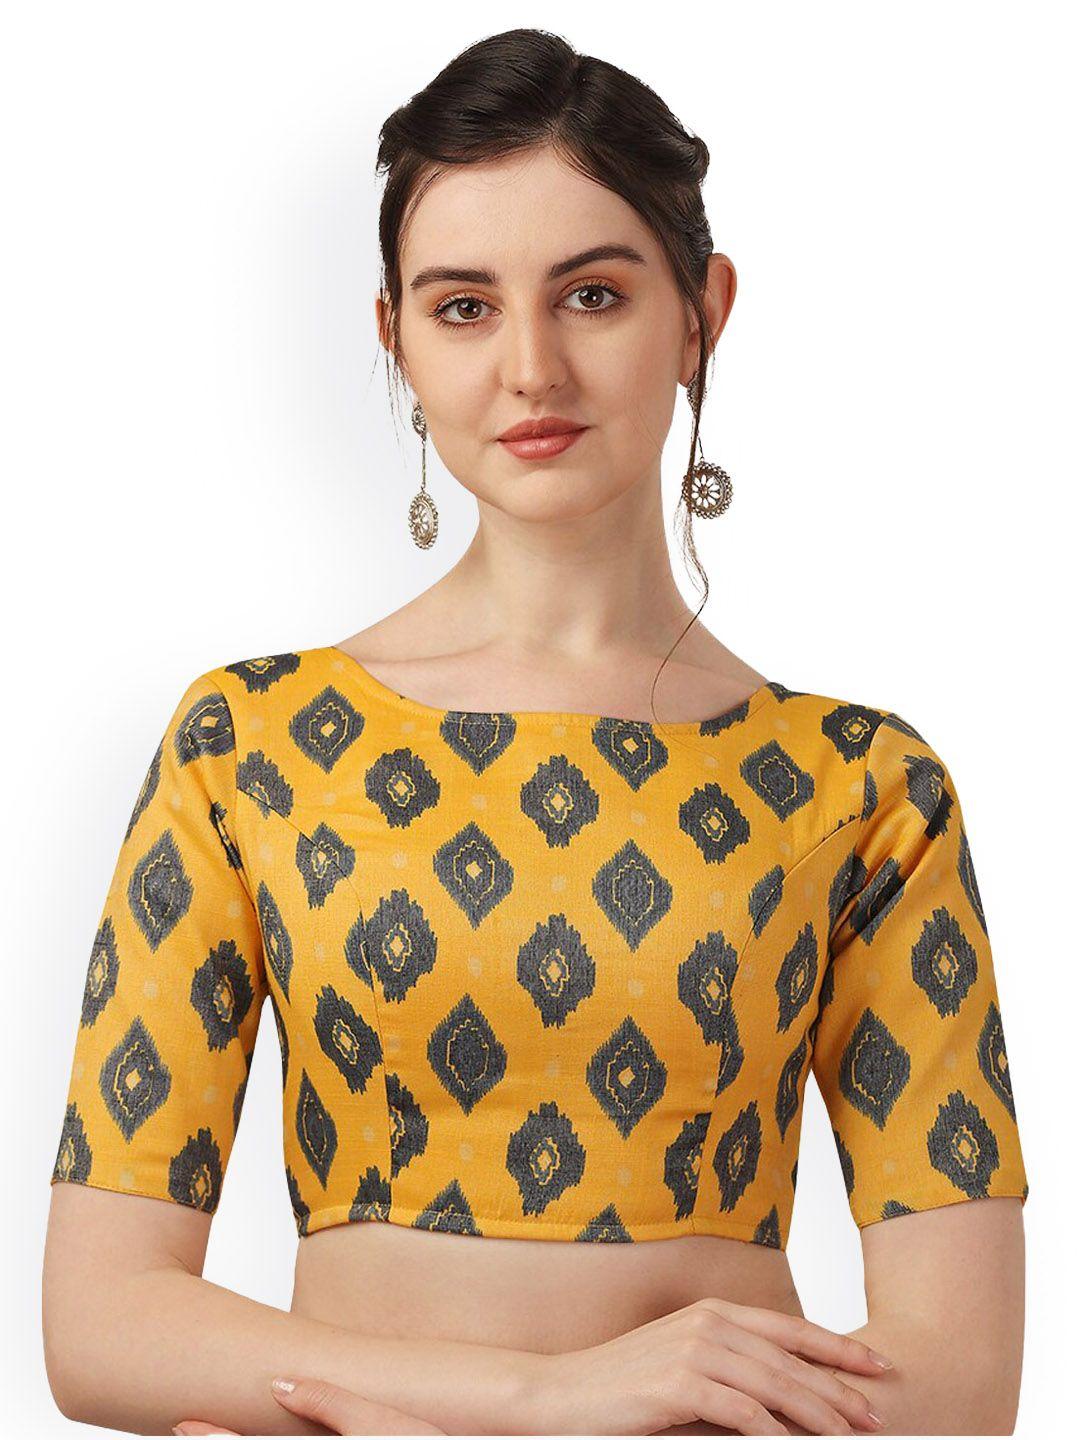 oomph! ethnic printed pure cotton saree blouse